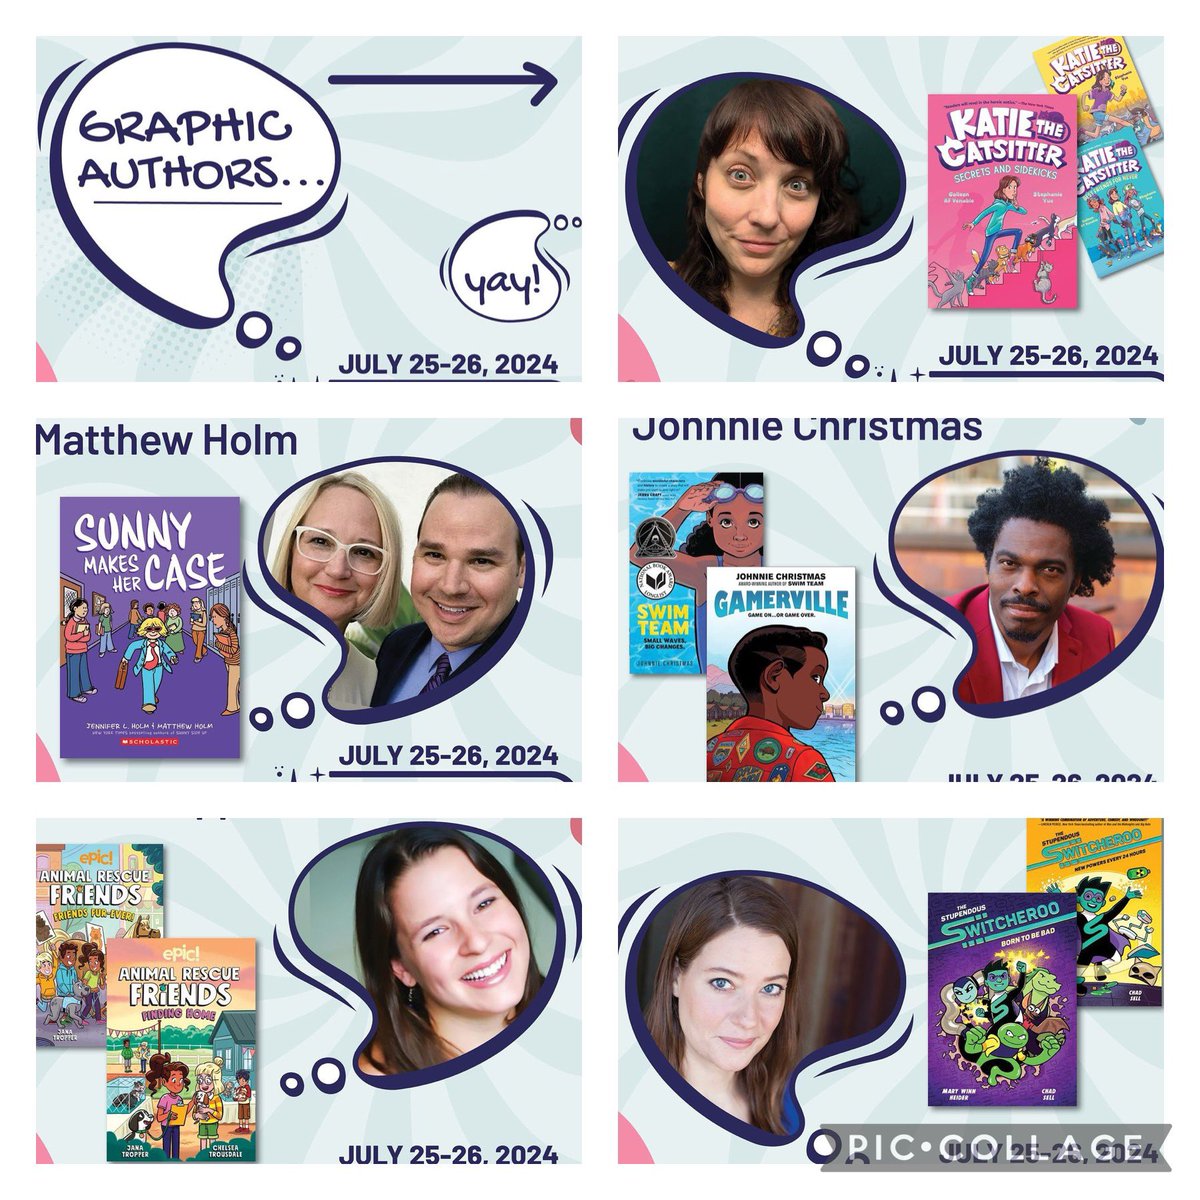 Happy #LITFriday! Do your students like graphic novels? Join Colleen AF Venable, Johnnie Christmas, Jennifer L. & Matthew Holm, Mary Winn Heider, and Jana Tropper & over 70 authors at our 2-day literary lovefest for educators! Register ➡️ LITapalooza2024.eventcombo.com